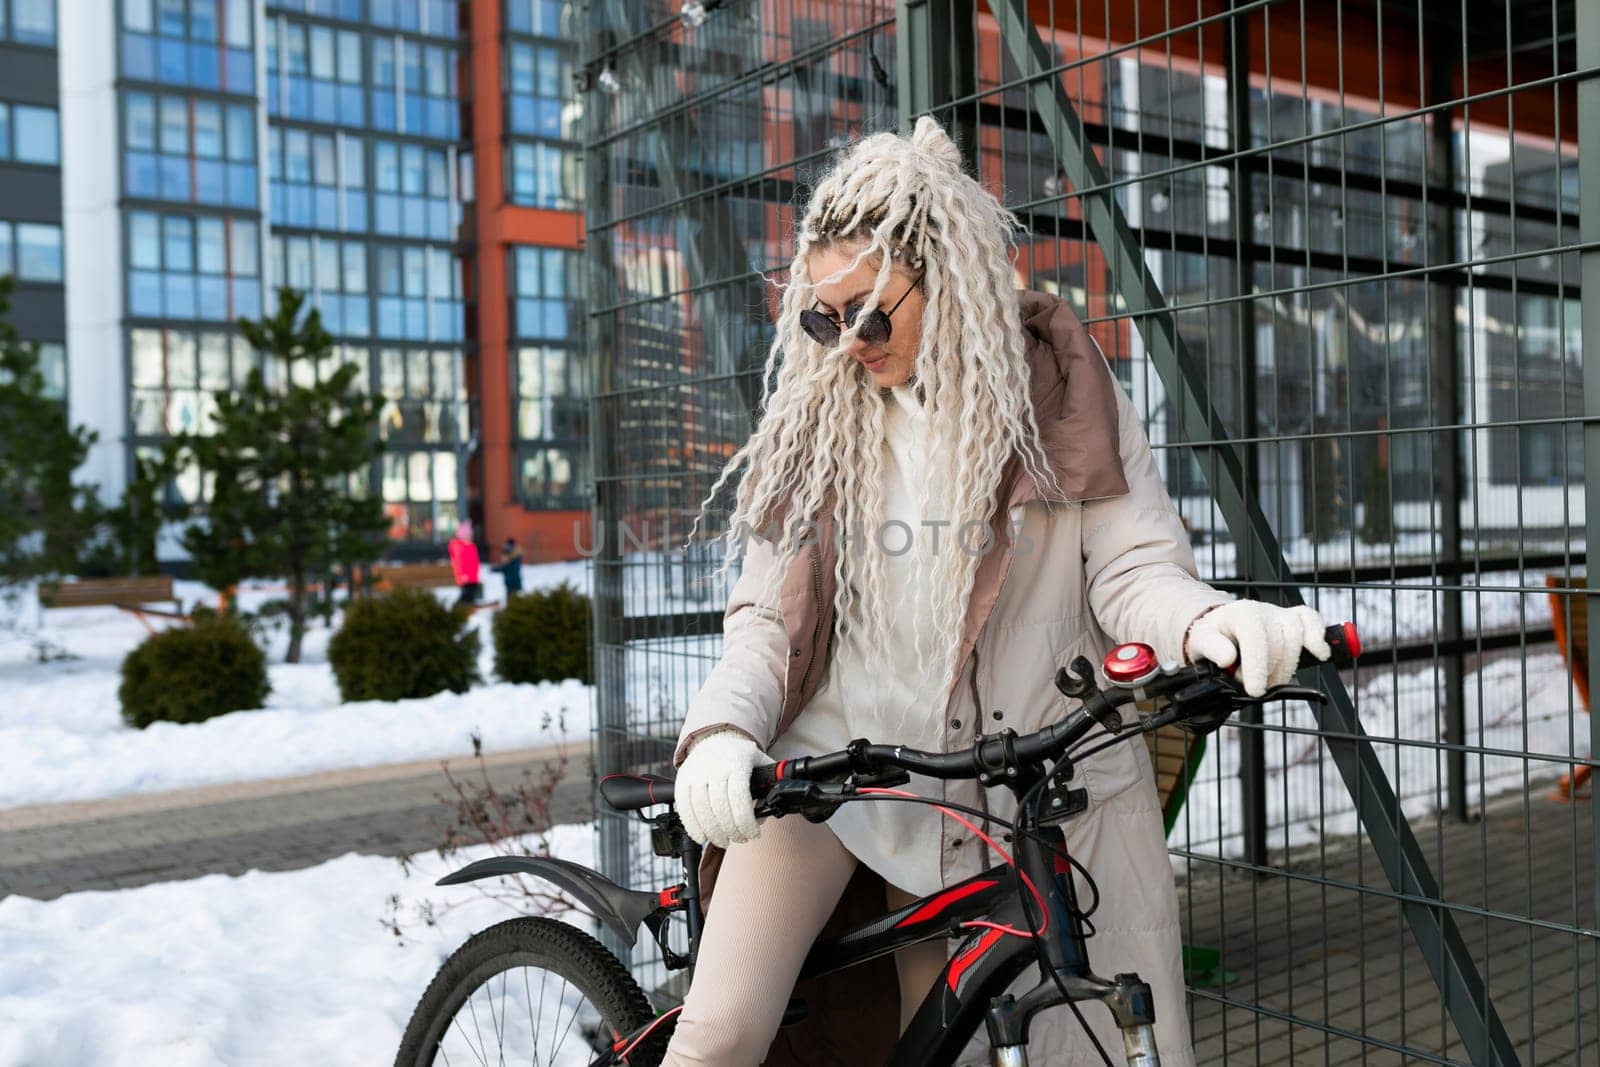 A woman with long white hair is riding a bike in the snow. She is bundled up in warm clothing as she pedals through the cold, snowy landscape.